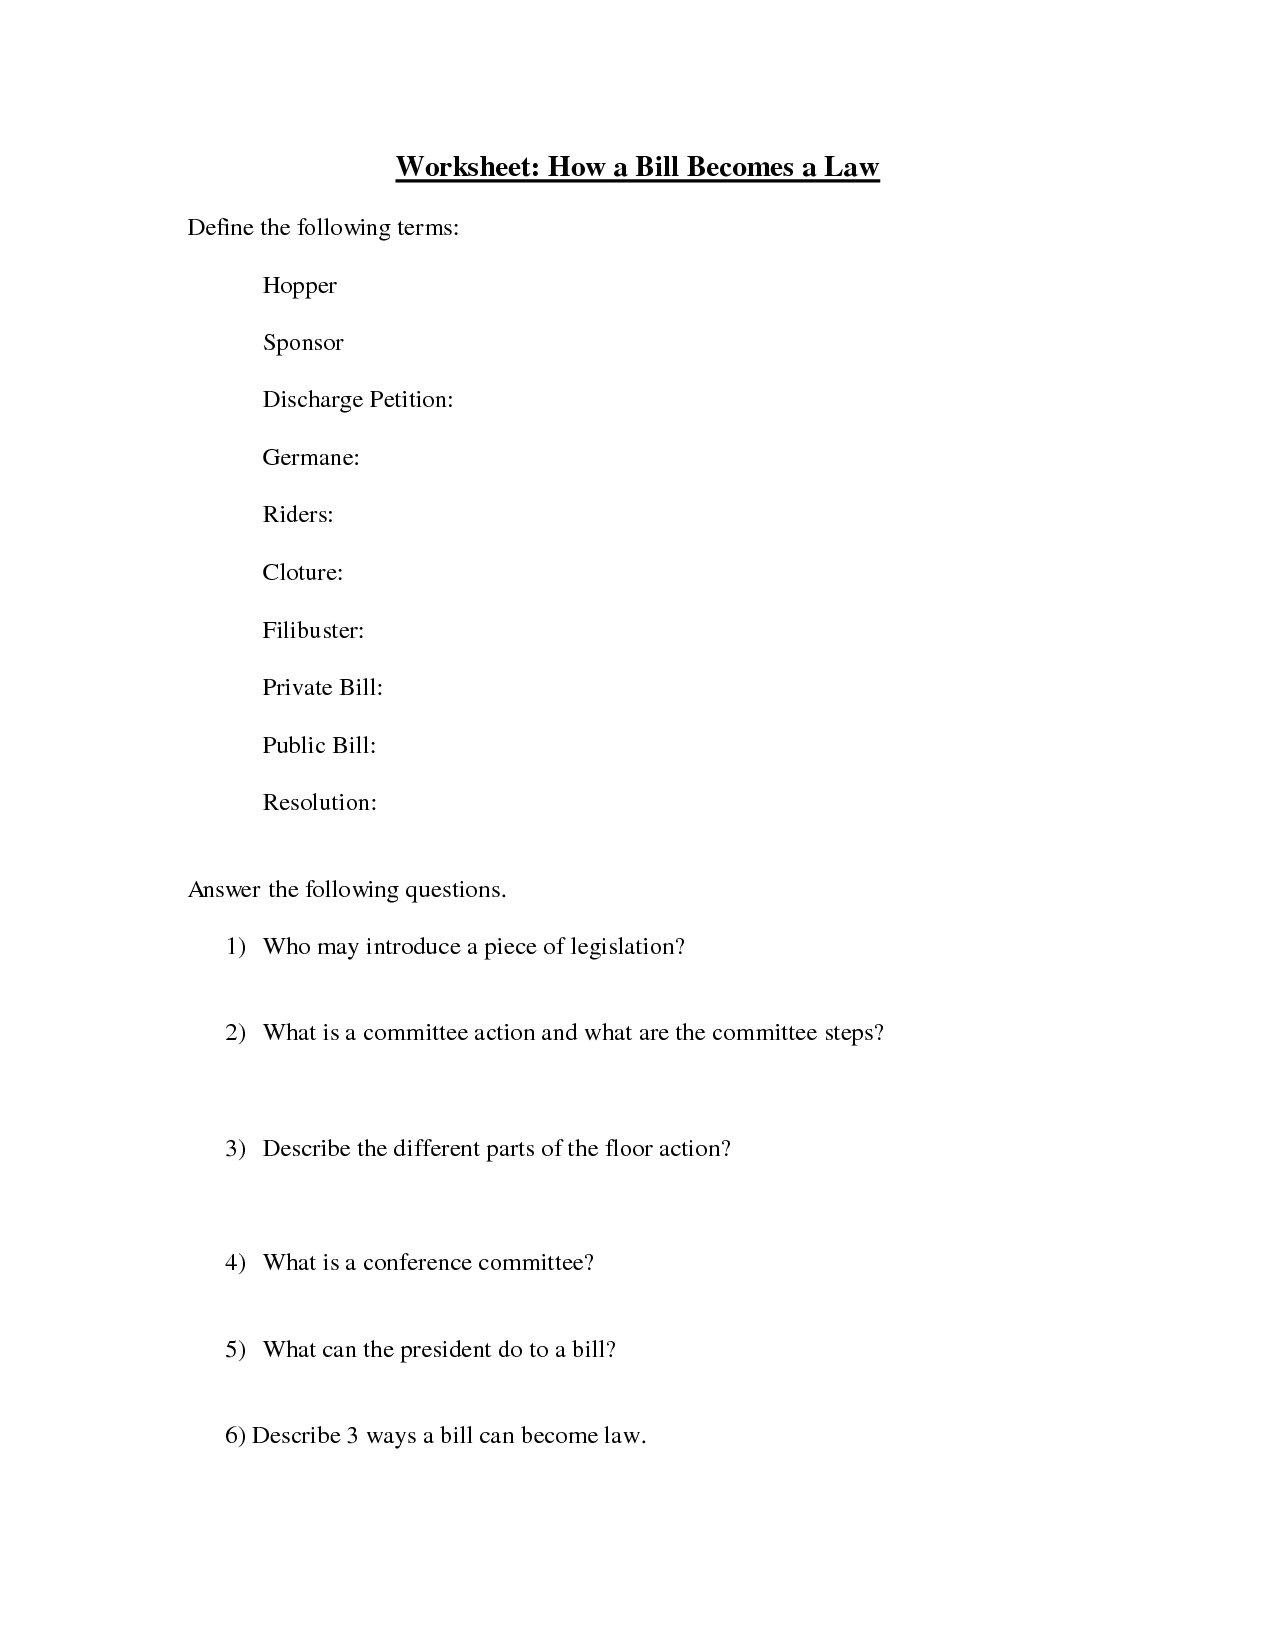 Steps How a Bill Becomes a Law Worksheet Image